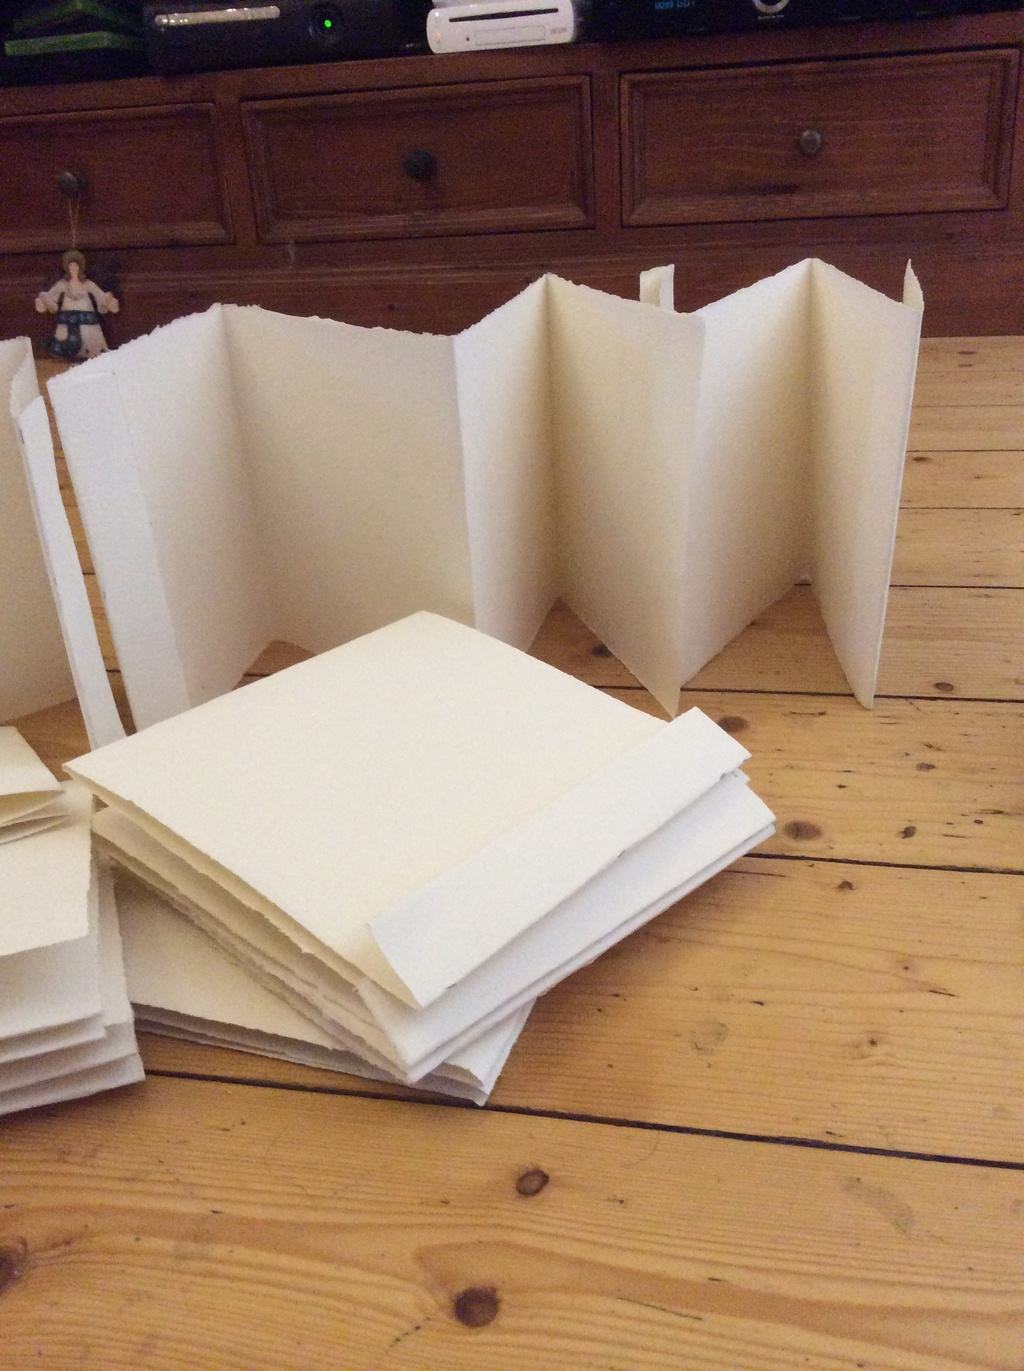 My starting point for my accordion book project